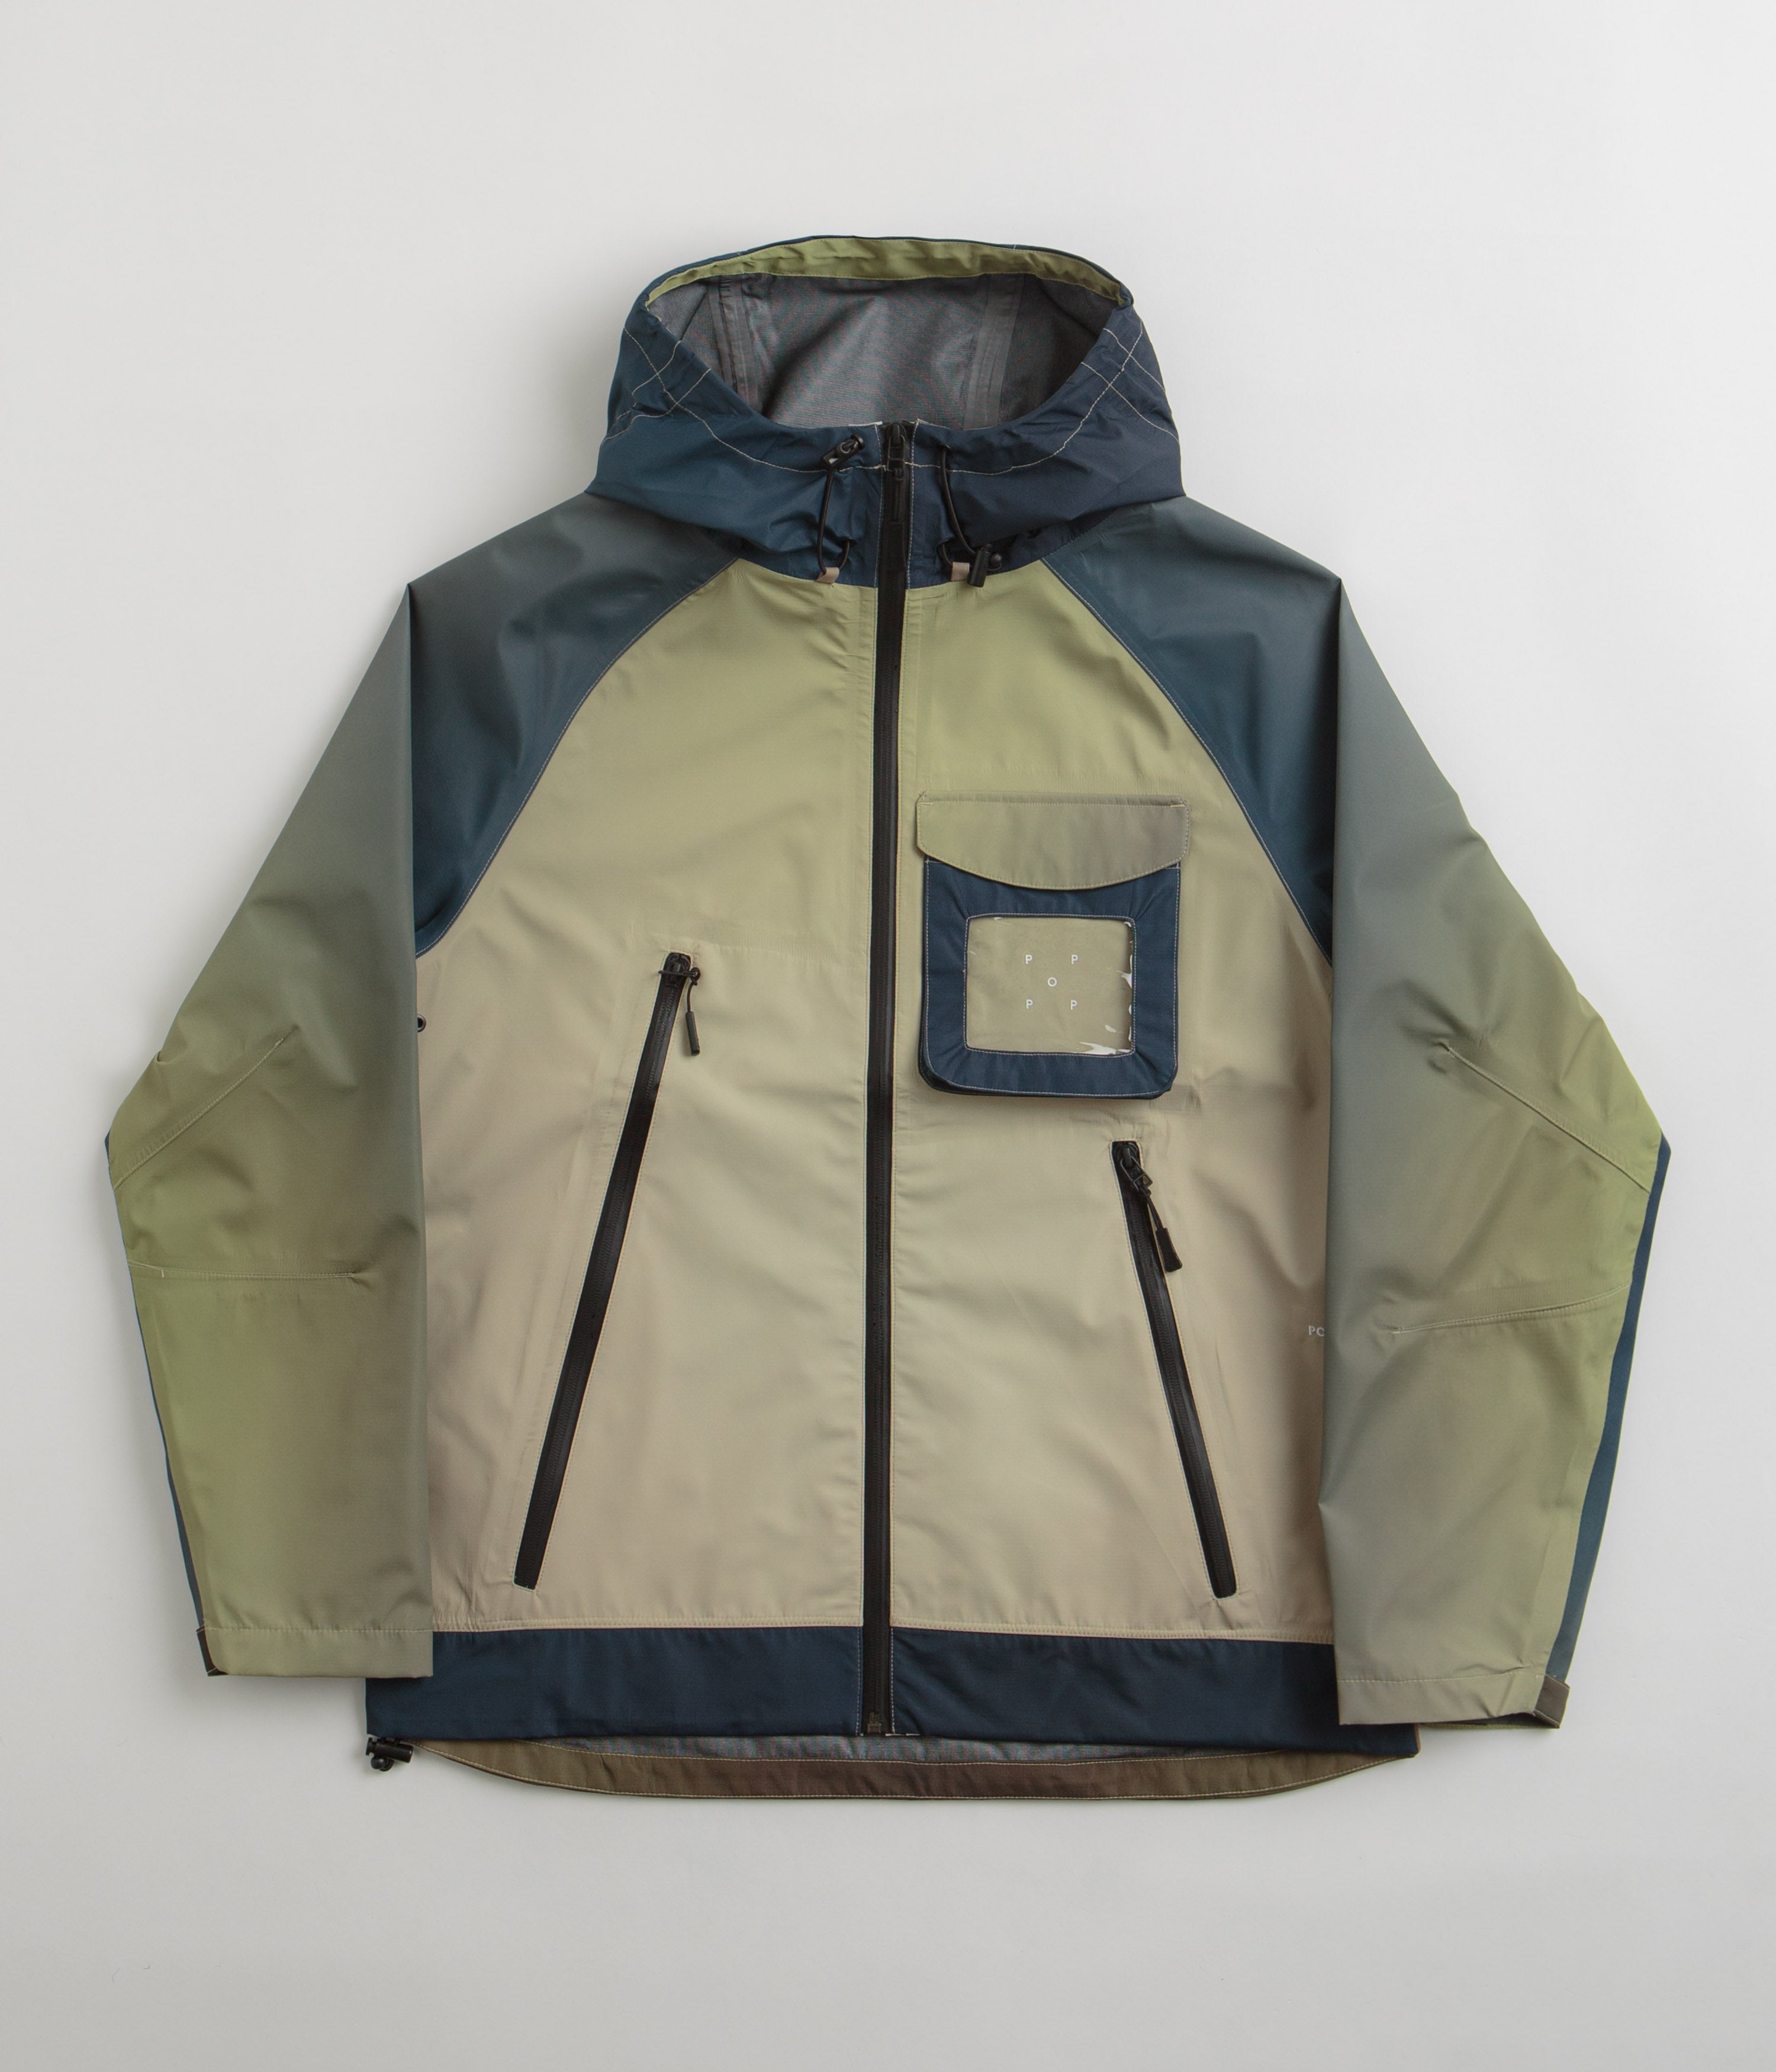 Pop Trading Company Oracle Jacket - Drizzle | Flatspot